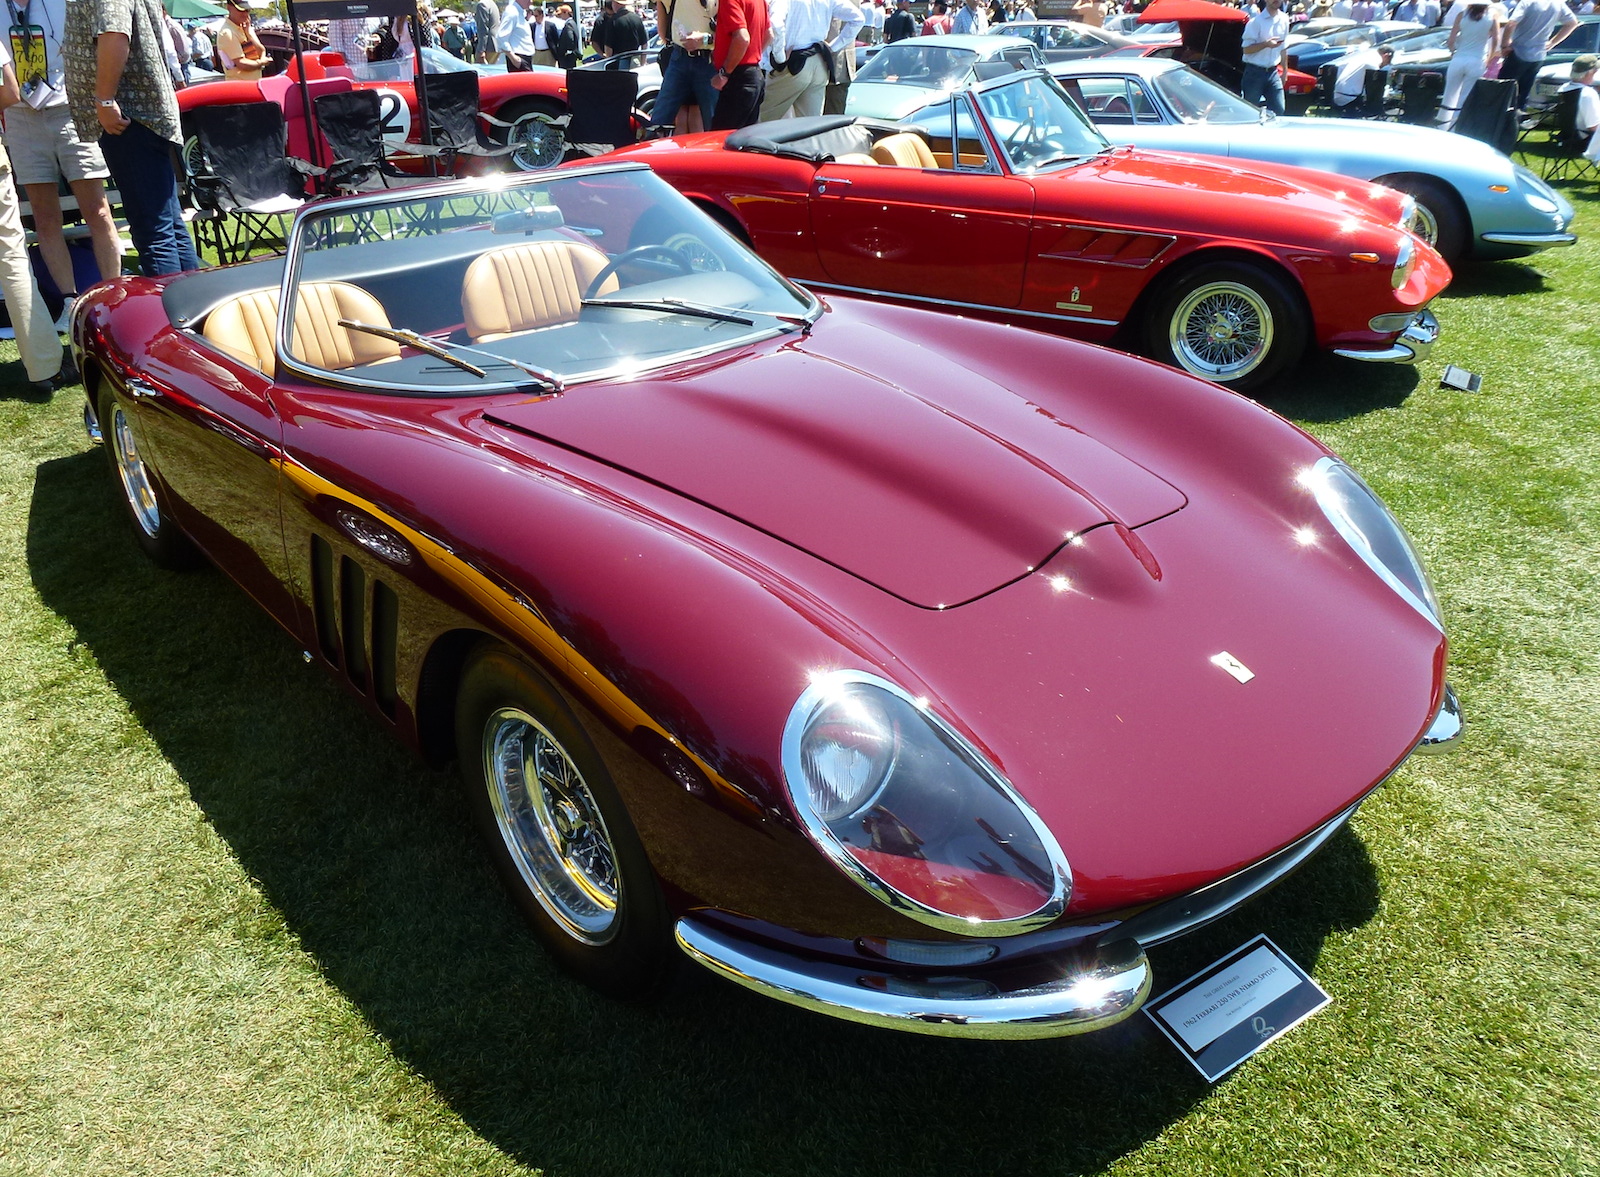 Celebrating Tom Meade At Concorso Italiano This Year